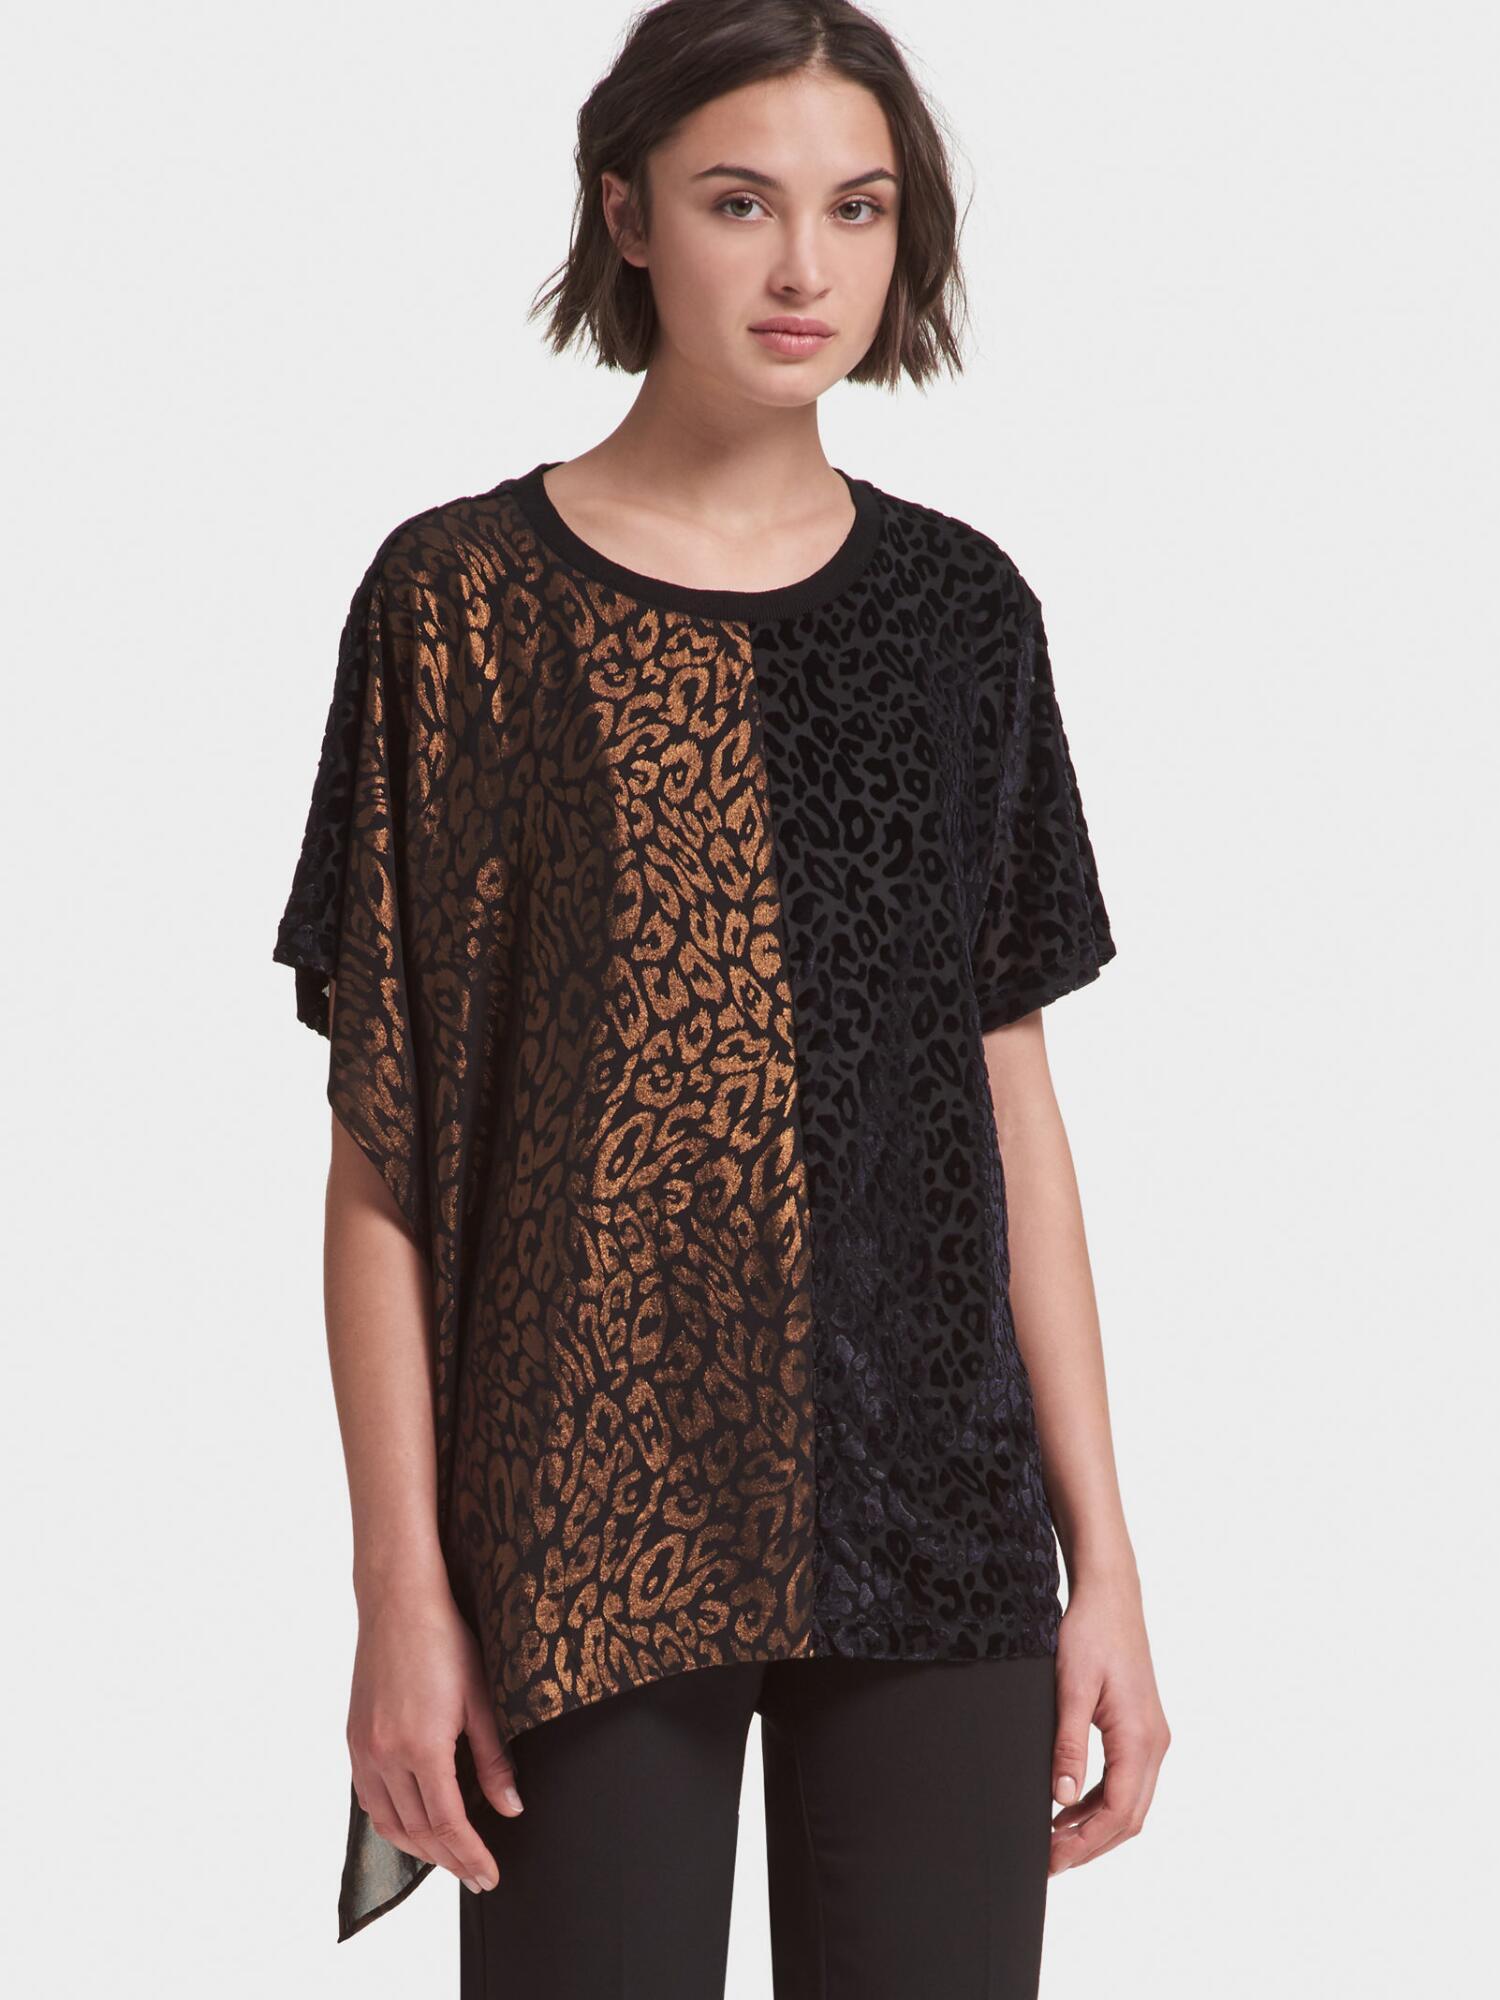 DKNY Synthetic Leopard-print Asymmetrical Top in Black - Save 29% - Lyst